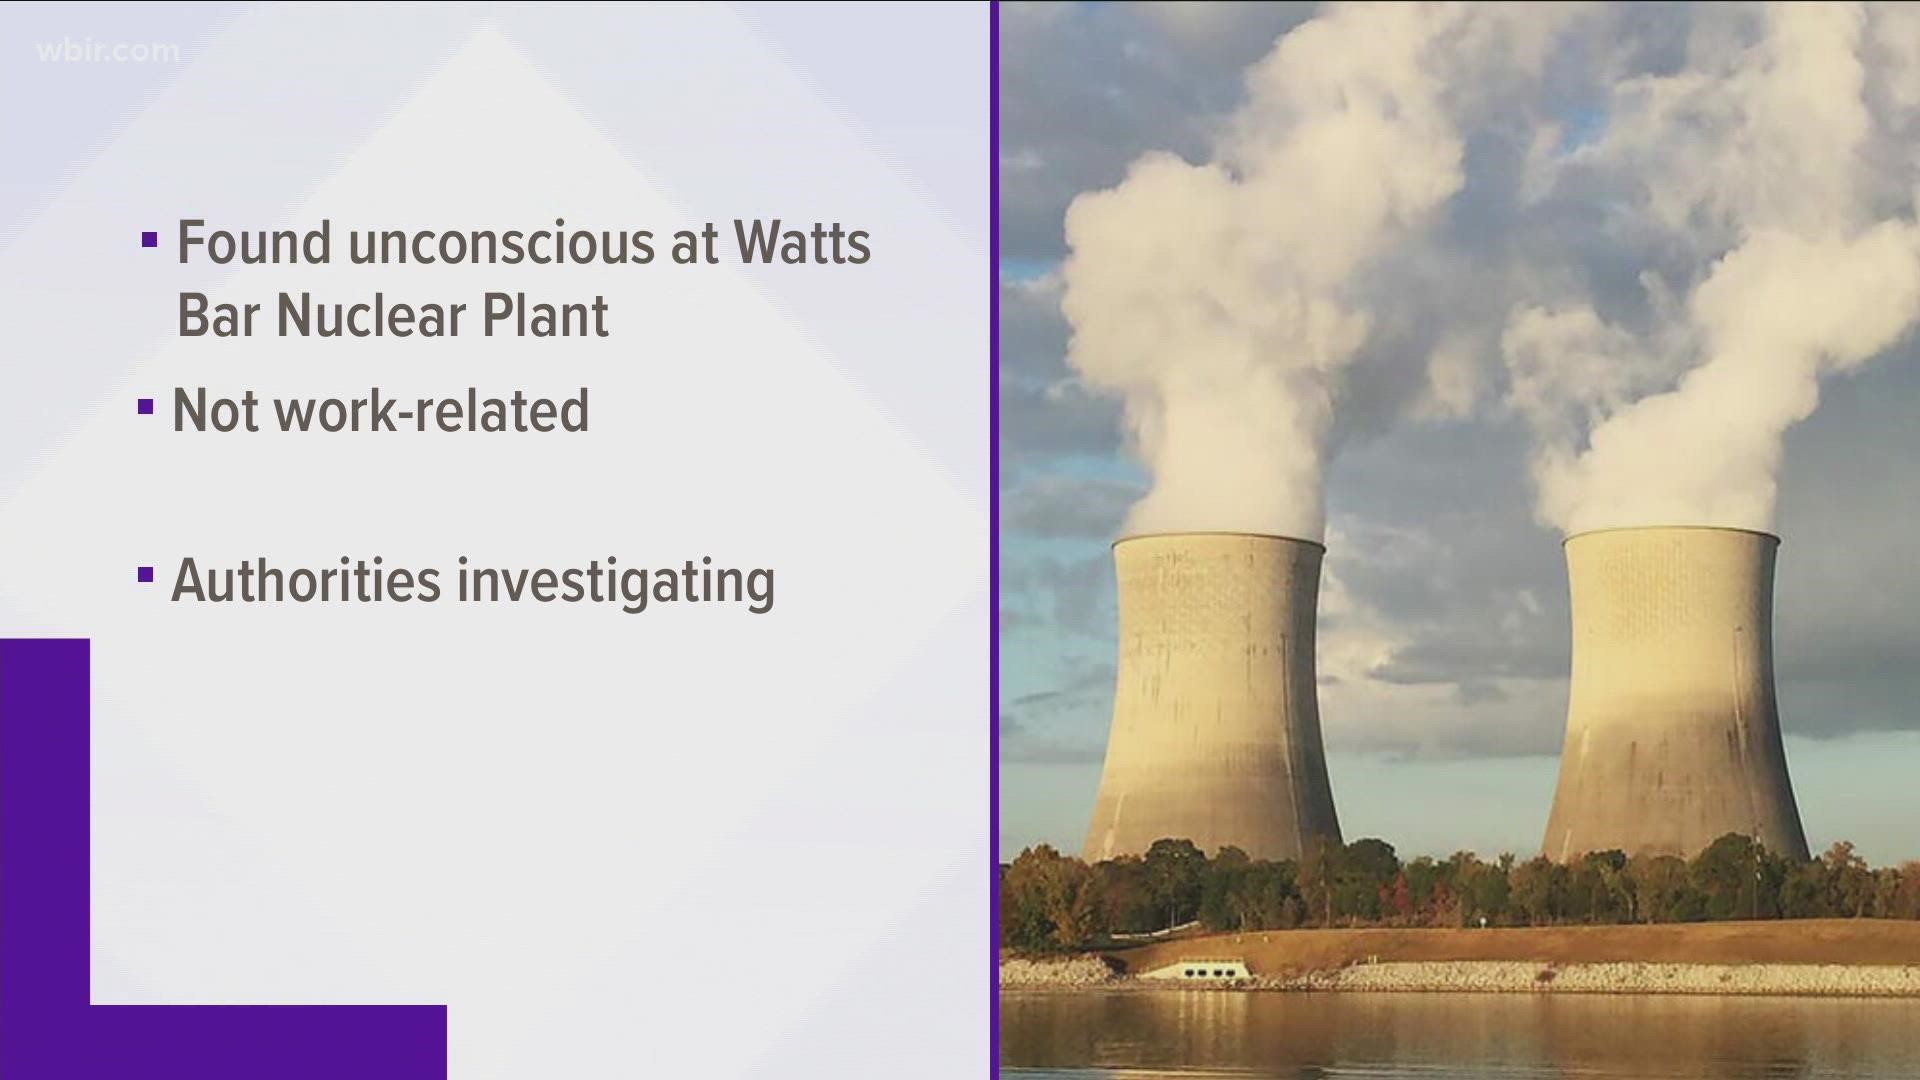 The agency says an employee was found unconscious at the Watts Bar Nuclear Plant overnight. It said the death did not appear to be work-related.